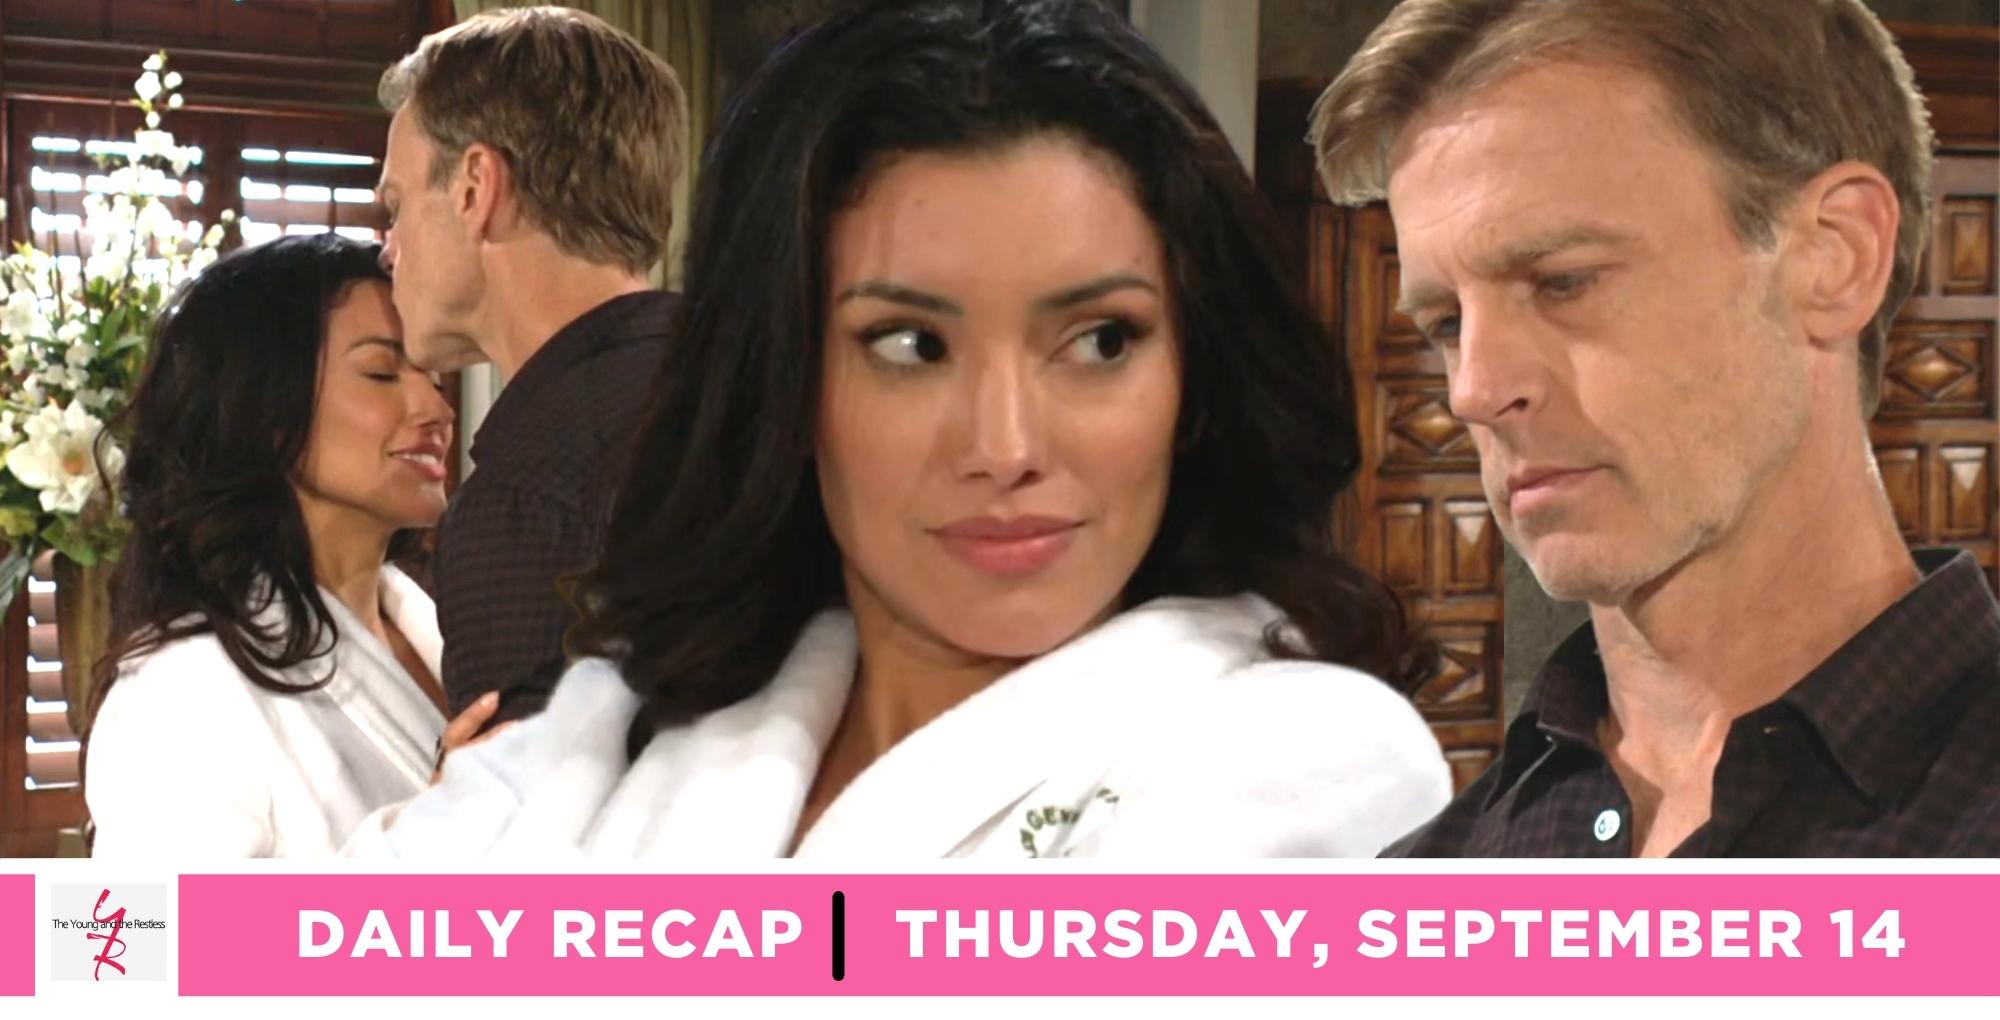 the young and the restless recap for september 14, 2023, has audra in a bathrobe kissing tucker and another shot next to him.